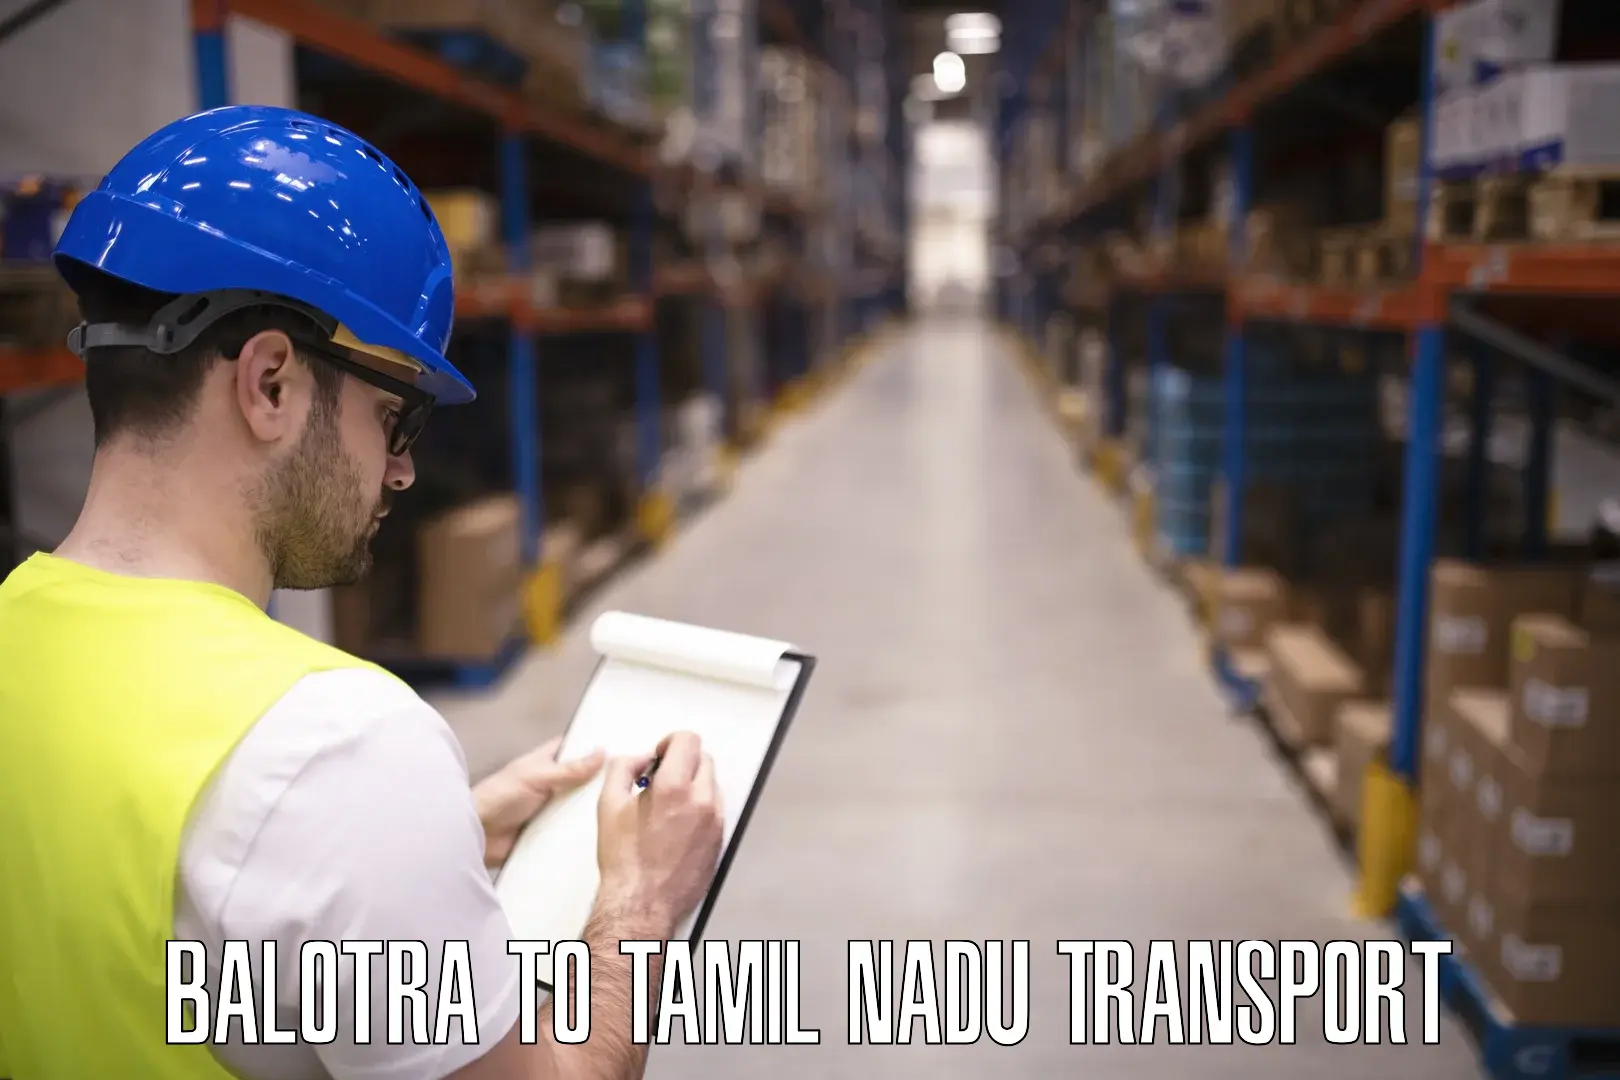 Goods delivery service Balotra to Tamil Nadu